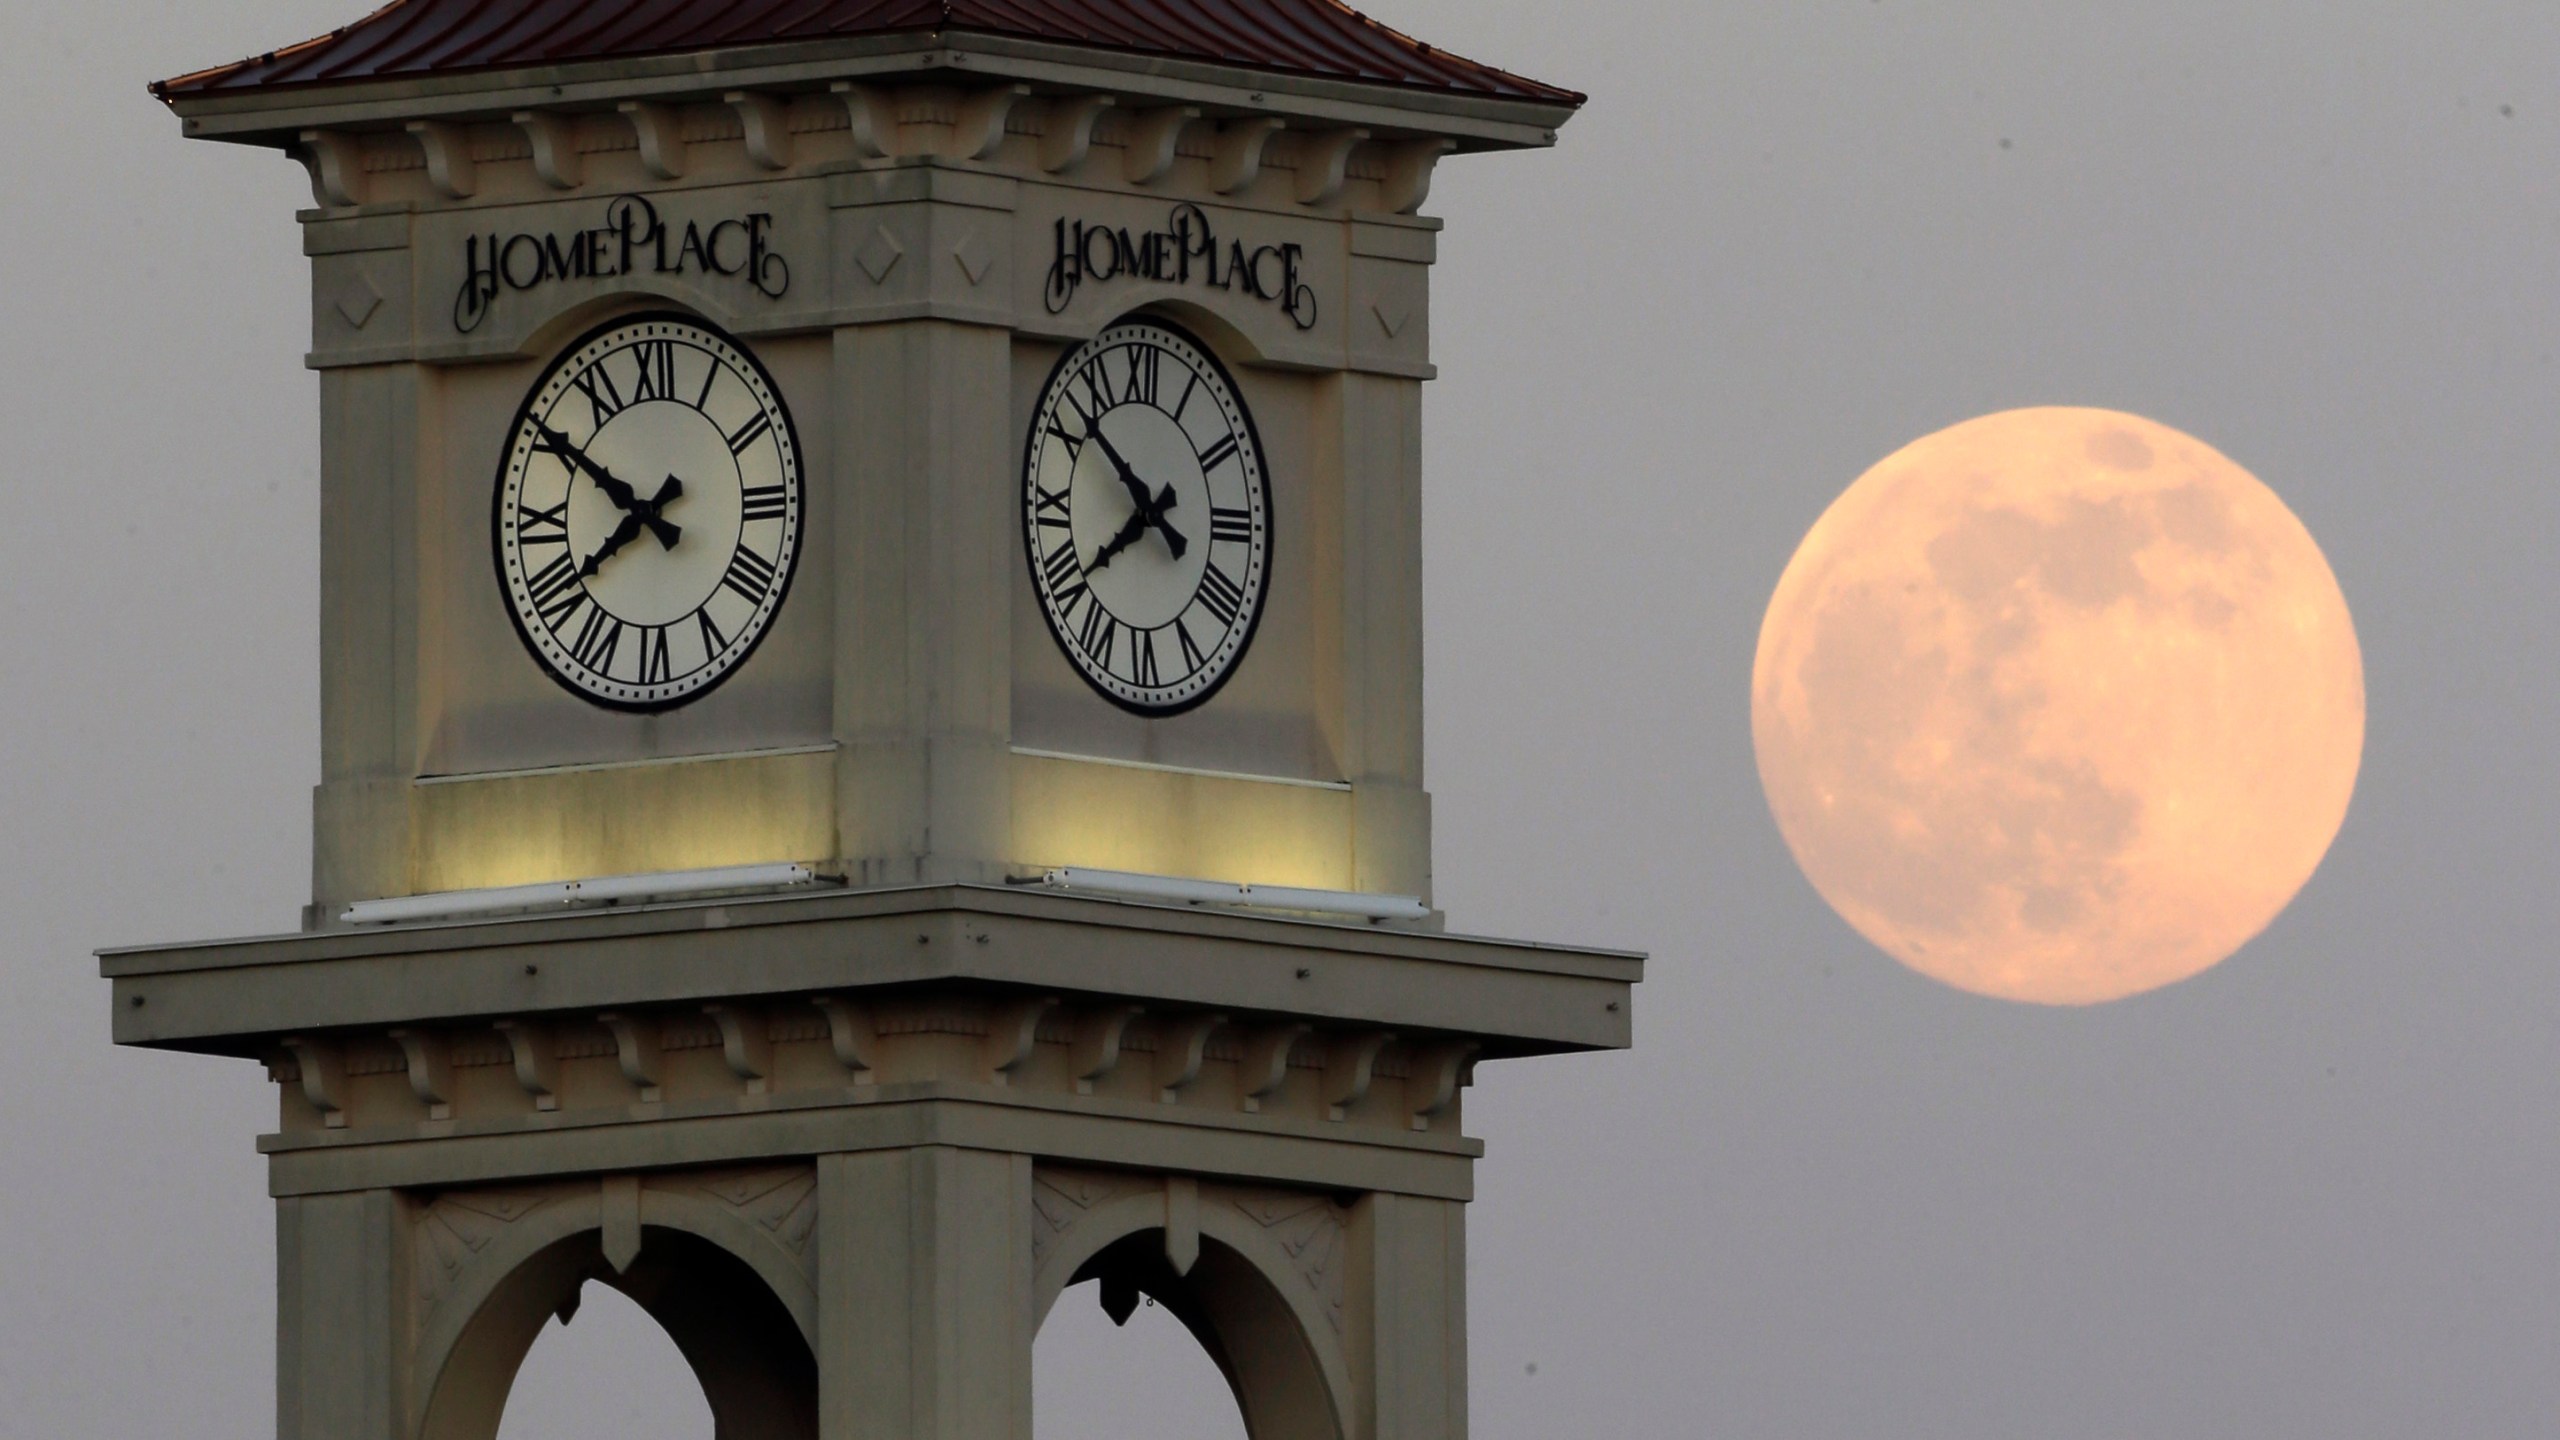 FILE - The moon rises behind the Home Place clock tower in Prattville, Ala., Saturday, June 22, 2013. NASA wants to come up with an out-of-this-world way to keep track of time, putting the moon on its own souped-up clock. The White House on Tuesday, April 2, 2204, told NASA to work with other agencies abroad to come up with a new moon-centric time reference system. (AP Photo/Dave Martin, File)